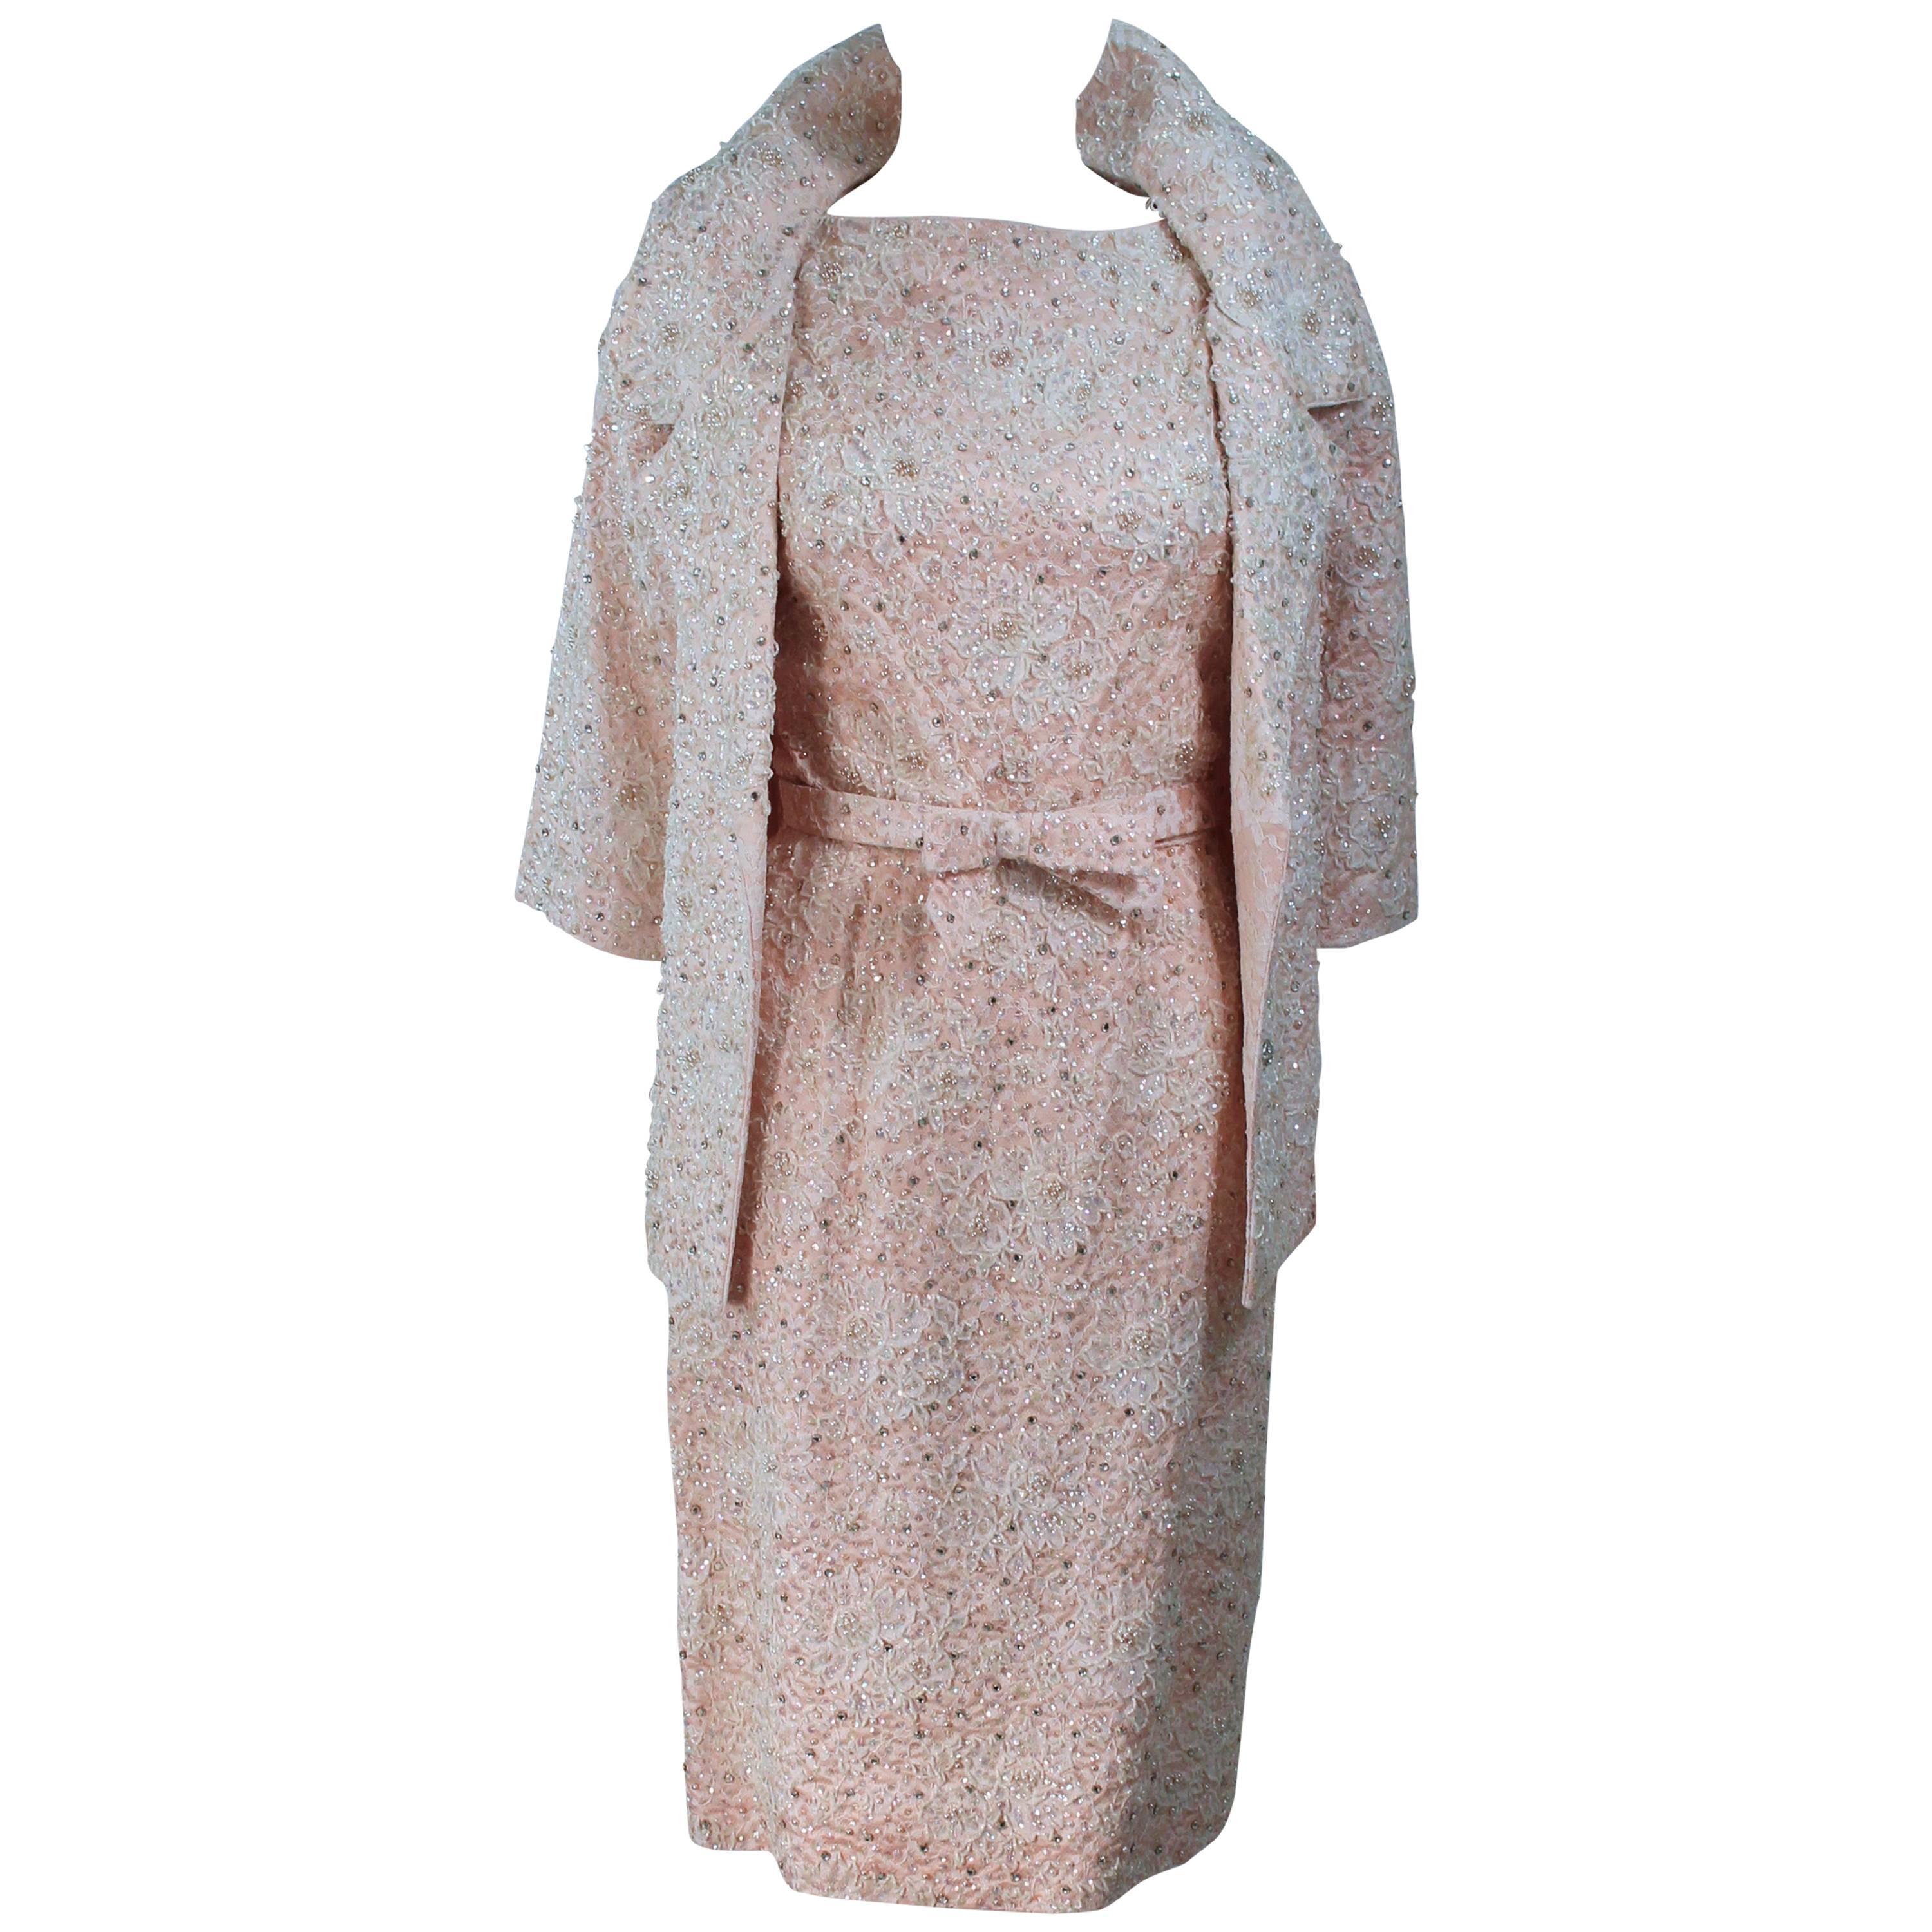 HAUTE COUTURE INTERNATIONALE 1960's Pink Beaded Dress and Jacket Ensemble Size 2